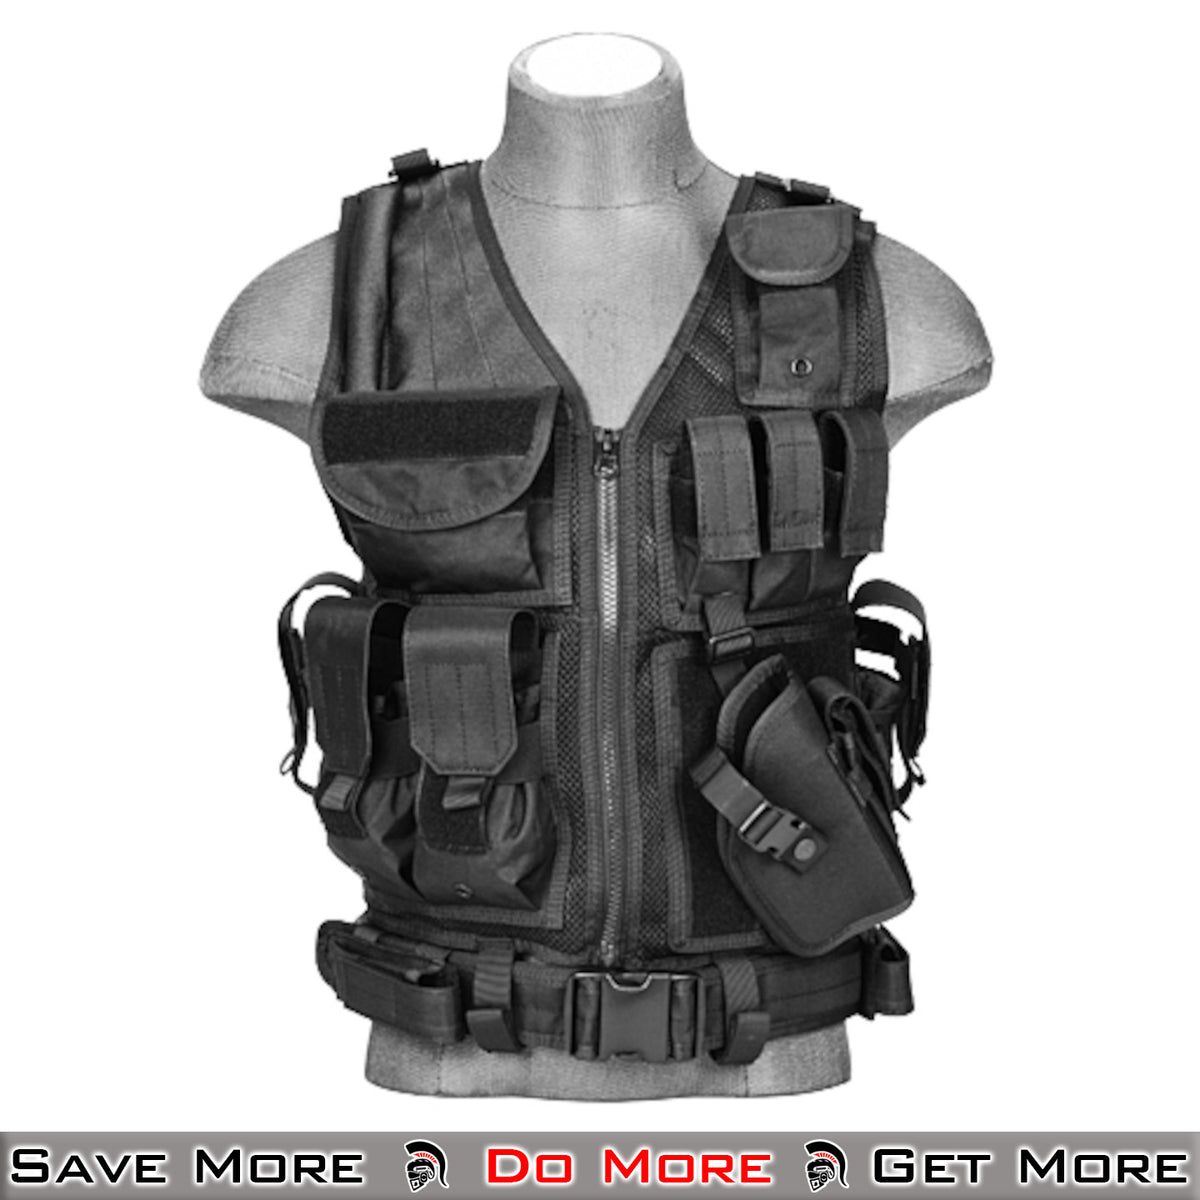 Lancer Tactical Nylon Cross Draw Vest With Holster ( Camo Tropic )